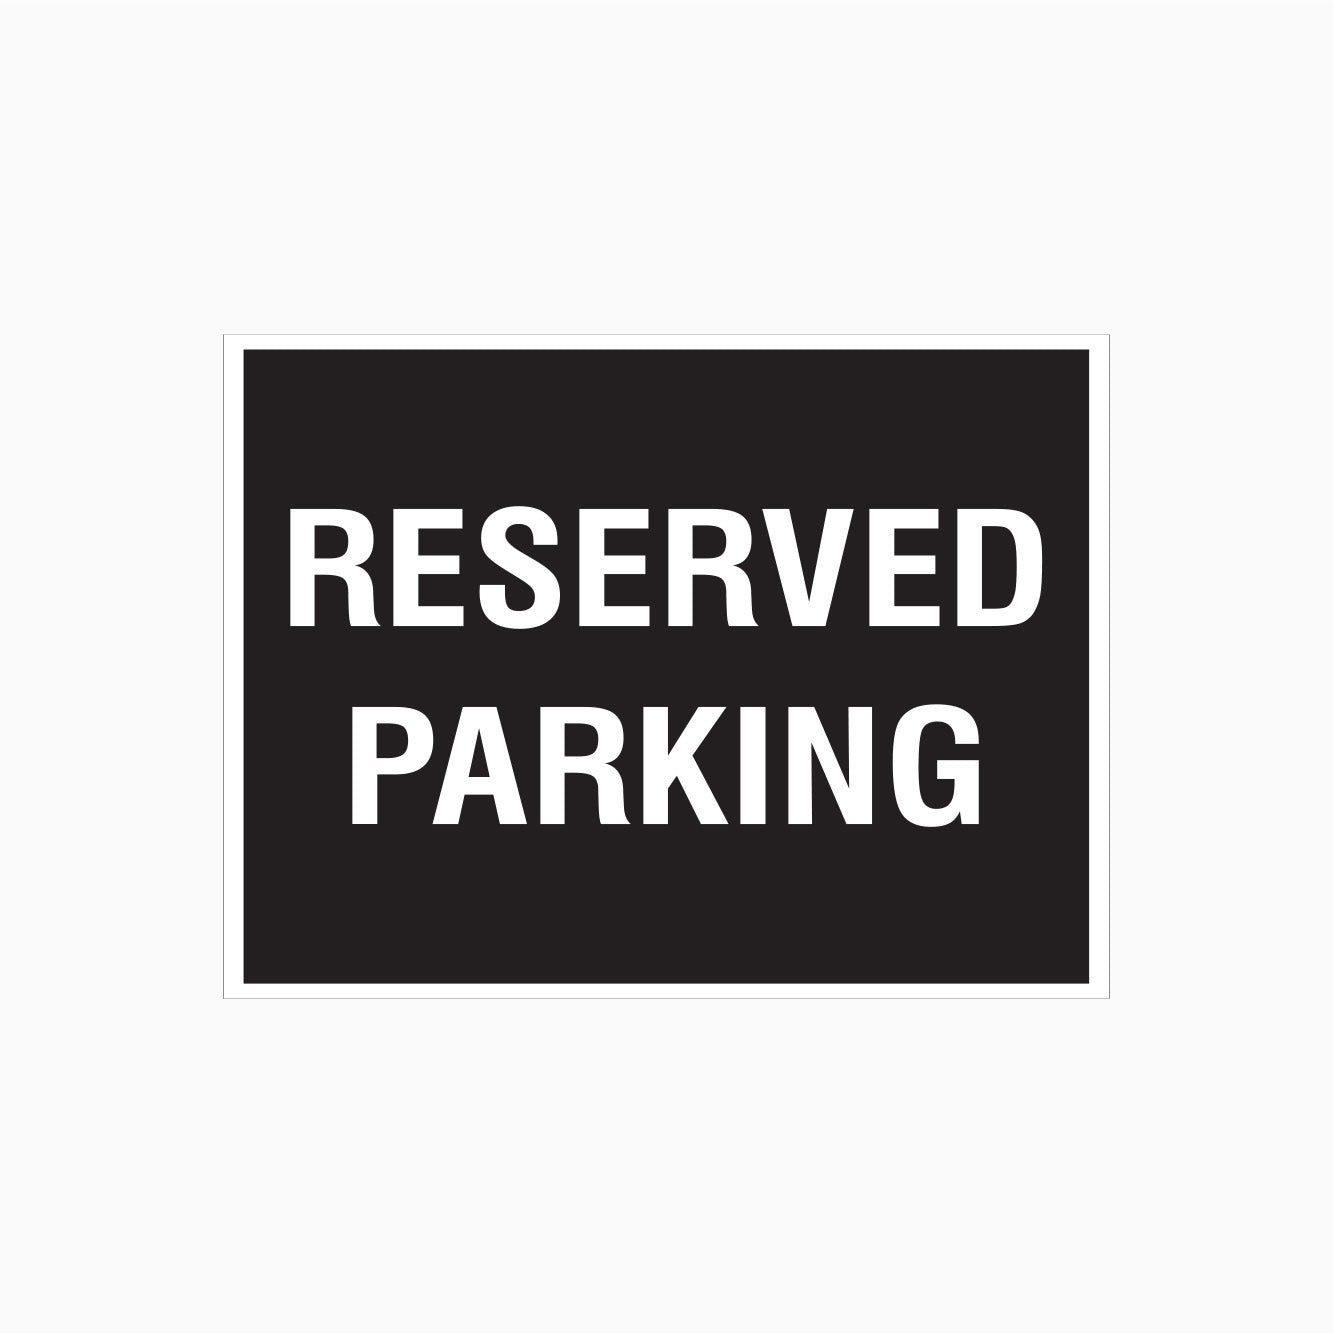 RESERVED PARKING SIGN - Shop for Parking Signs and more at Get Signs.